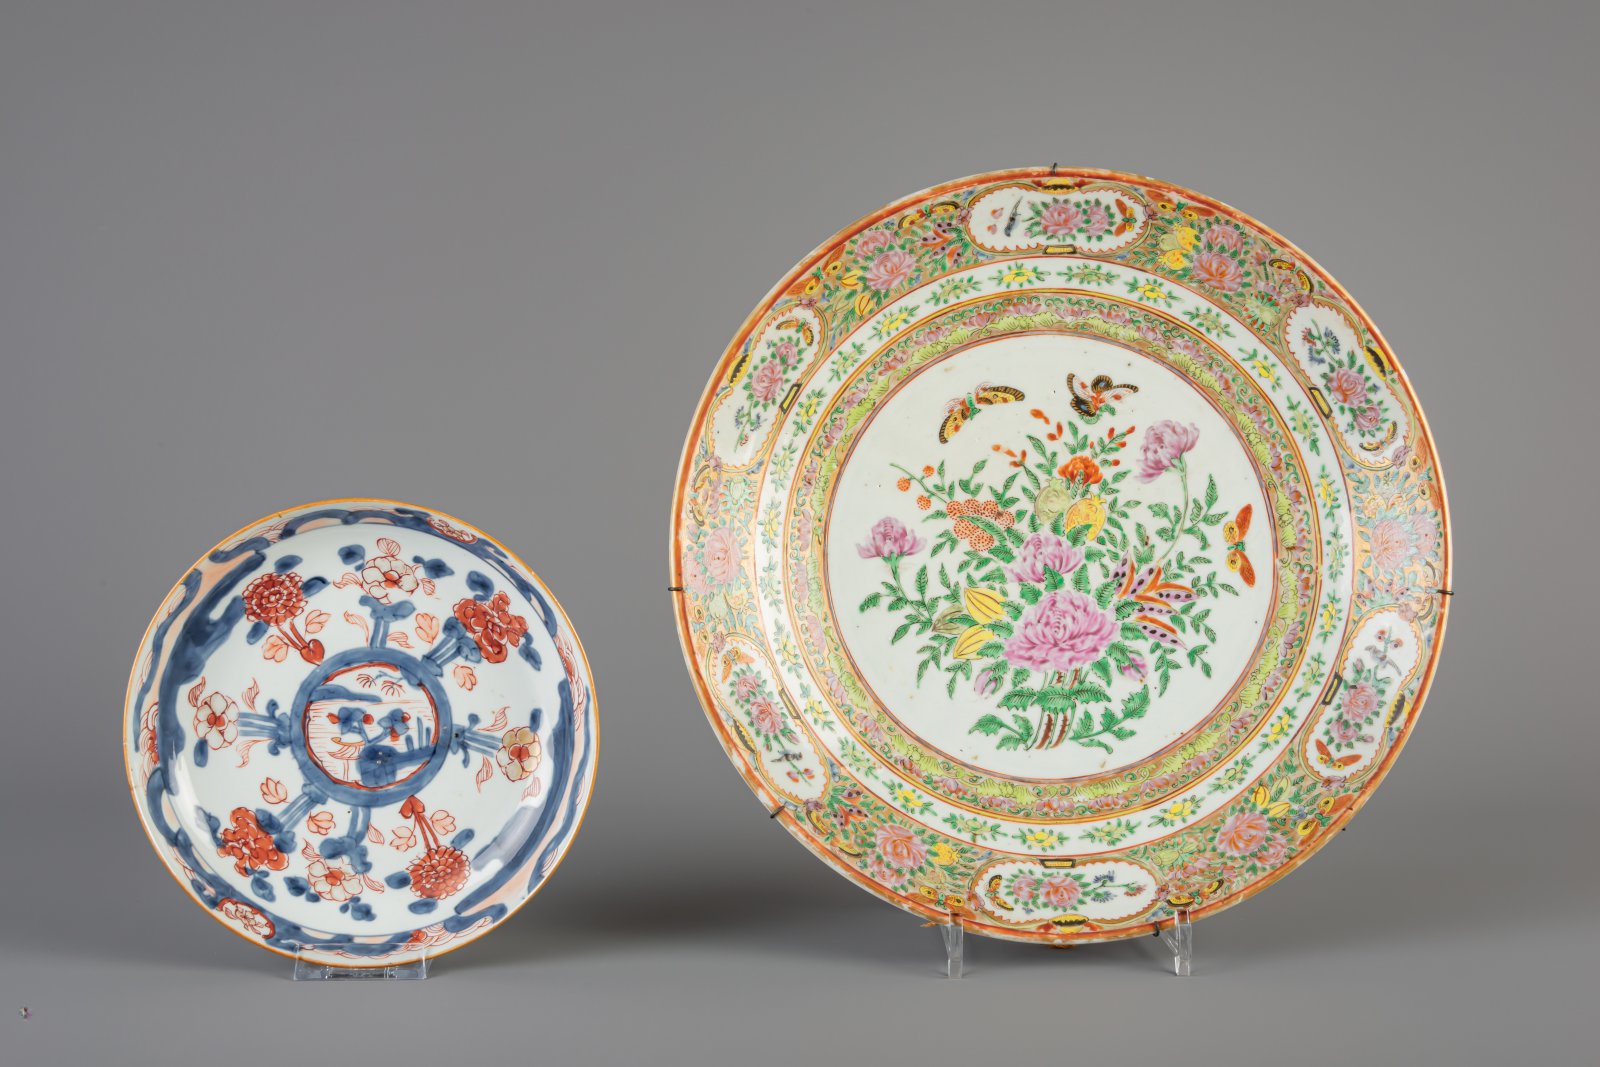 A varied collection of Chinese porcelain, 18th/19th C. - Image 2 of 13